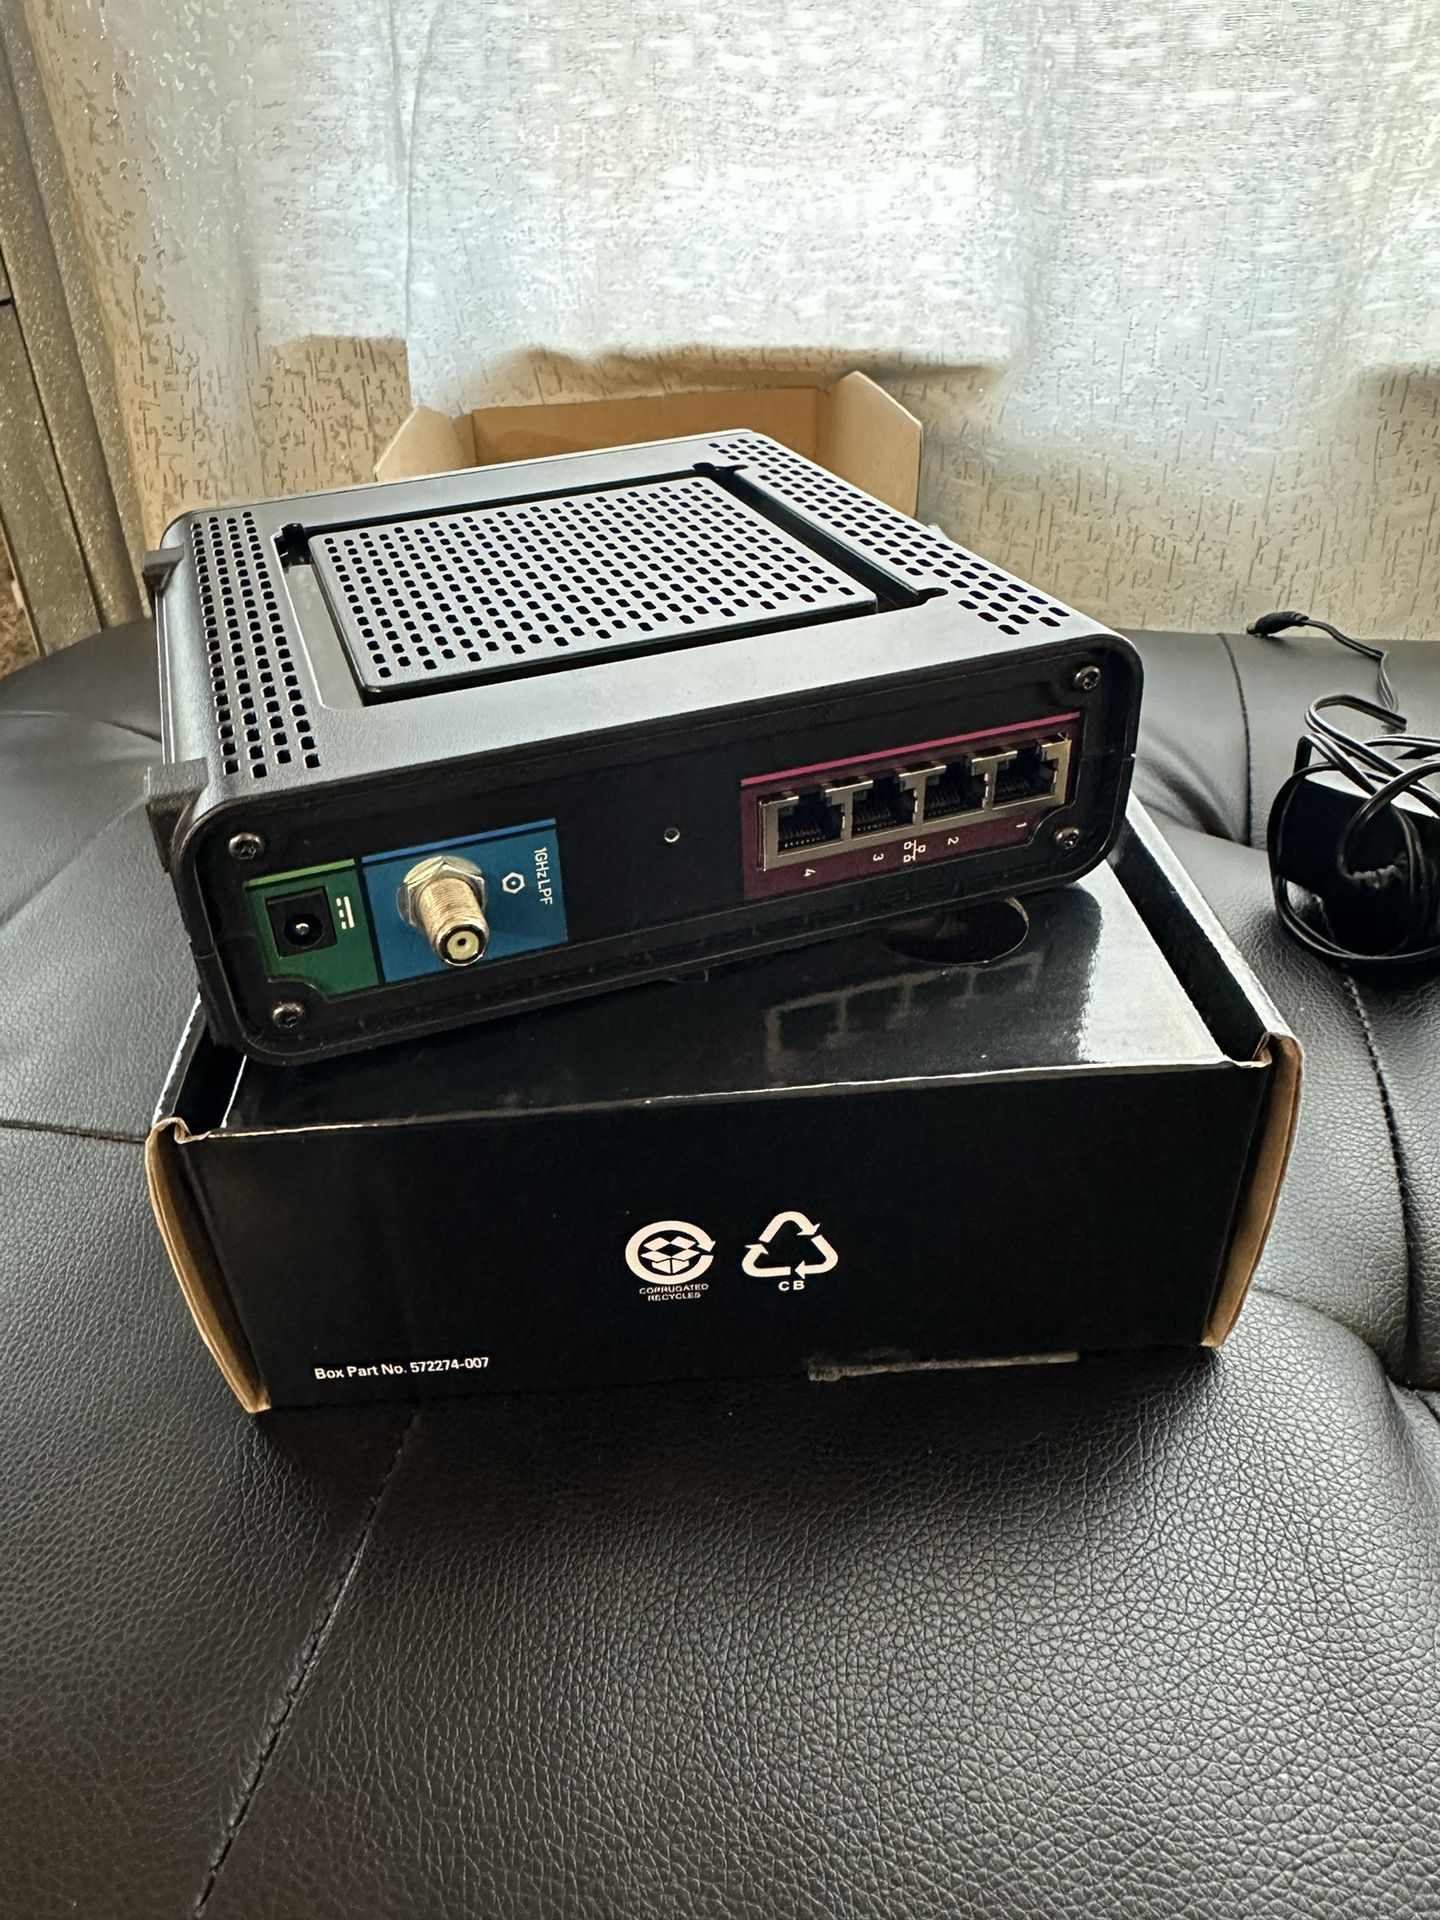 Motorola Modem And WiFi Router